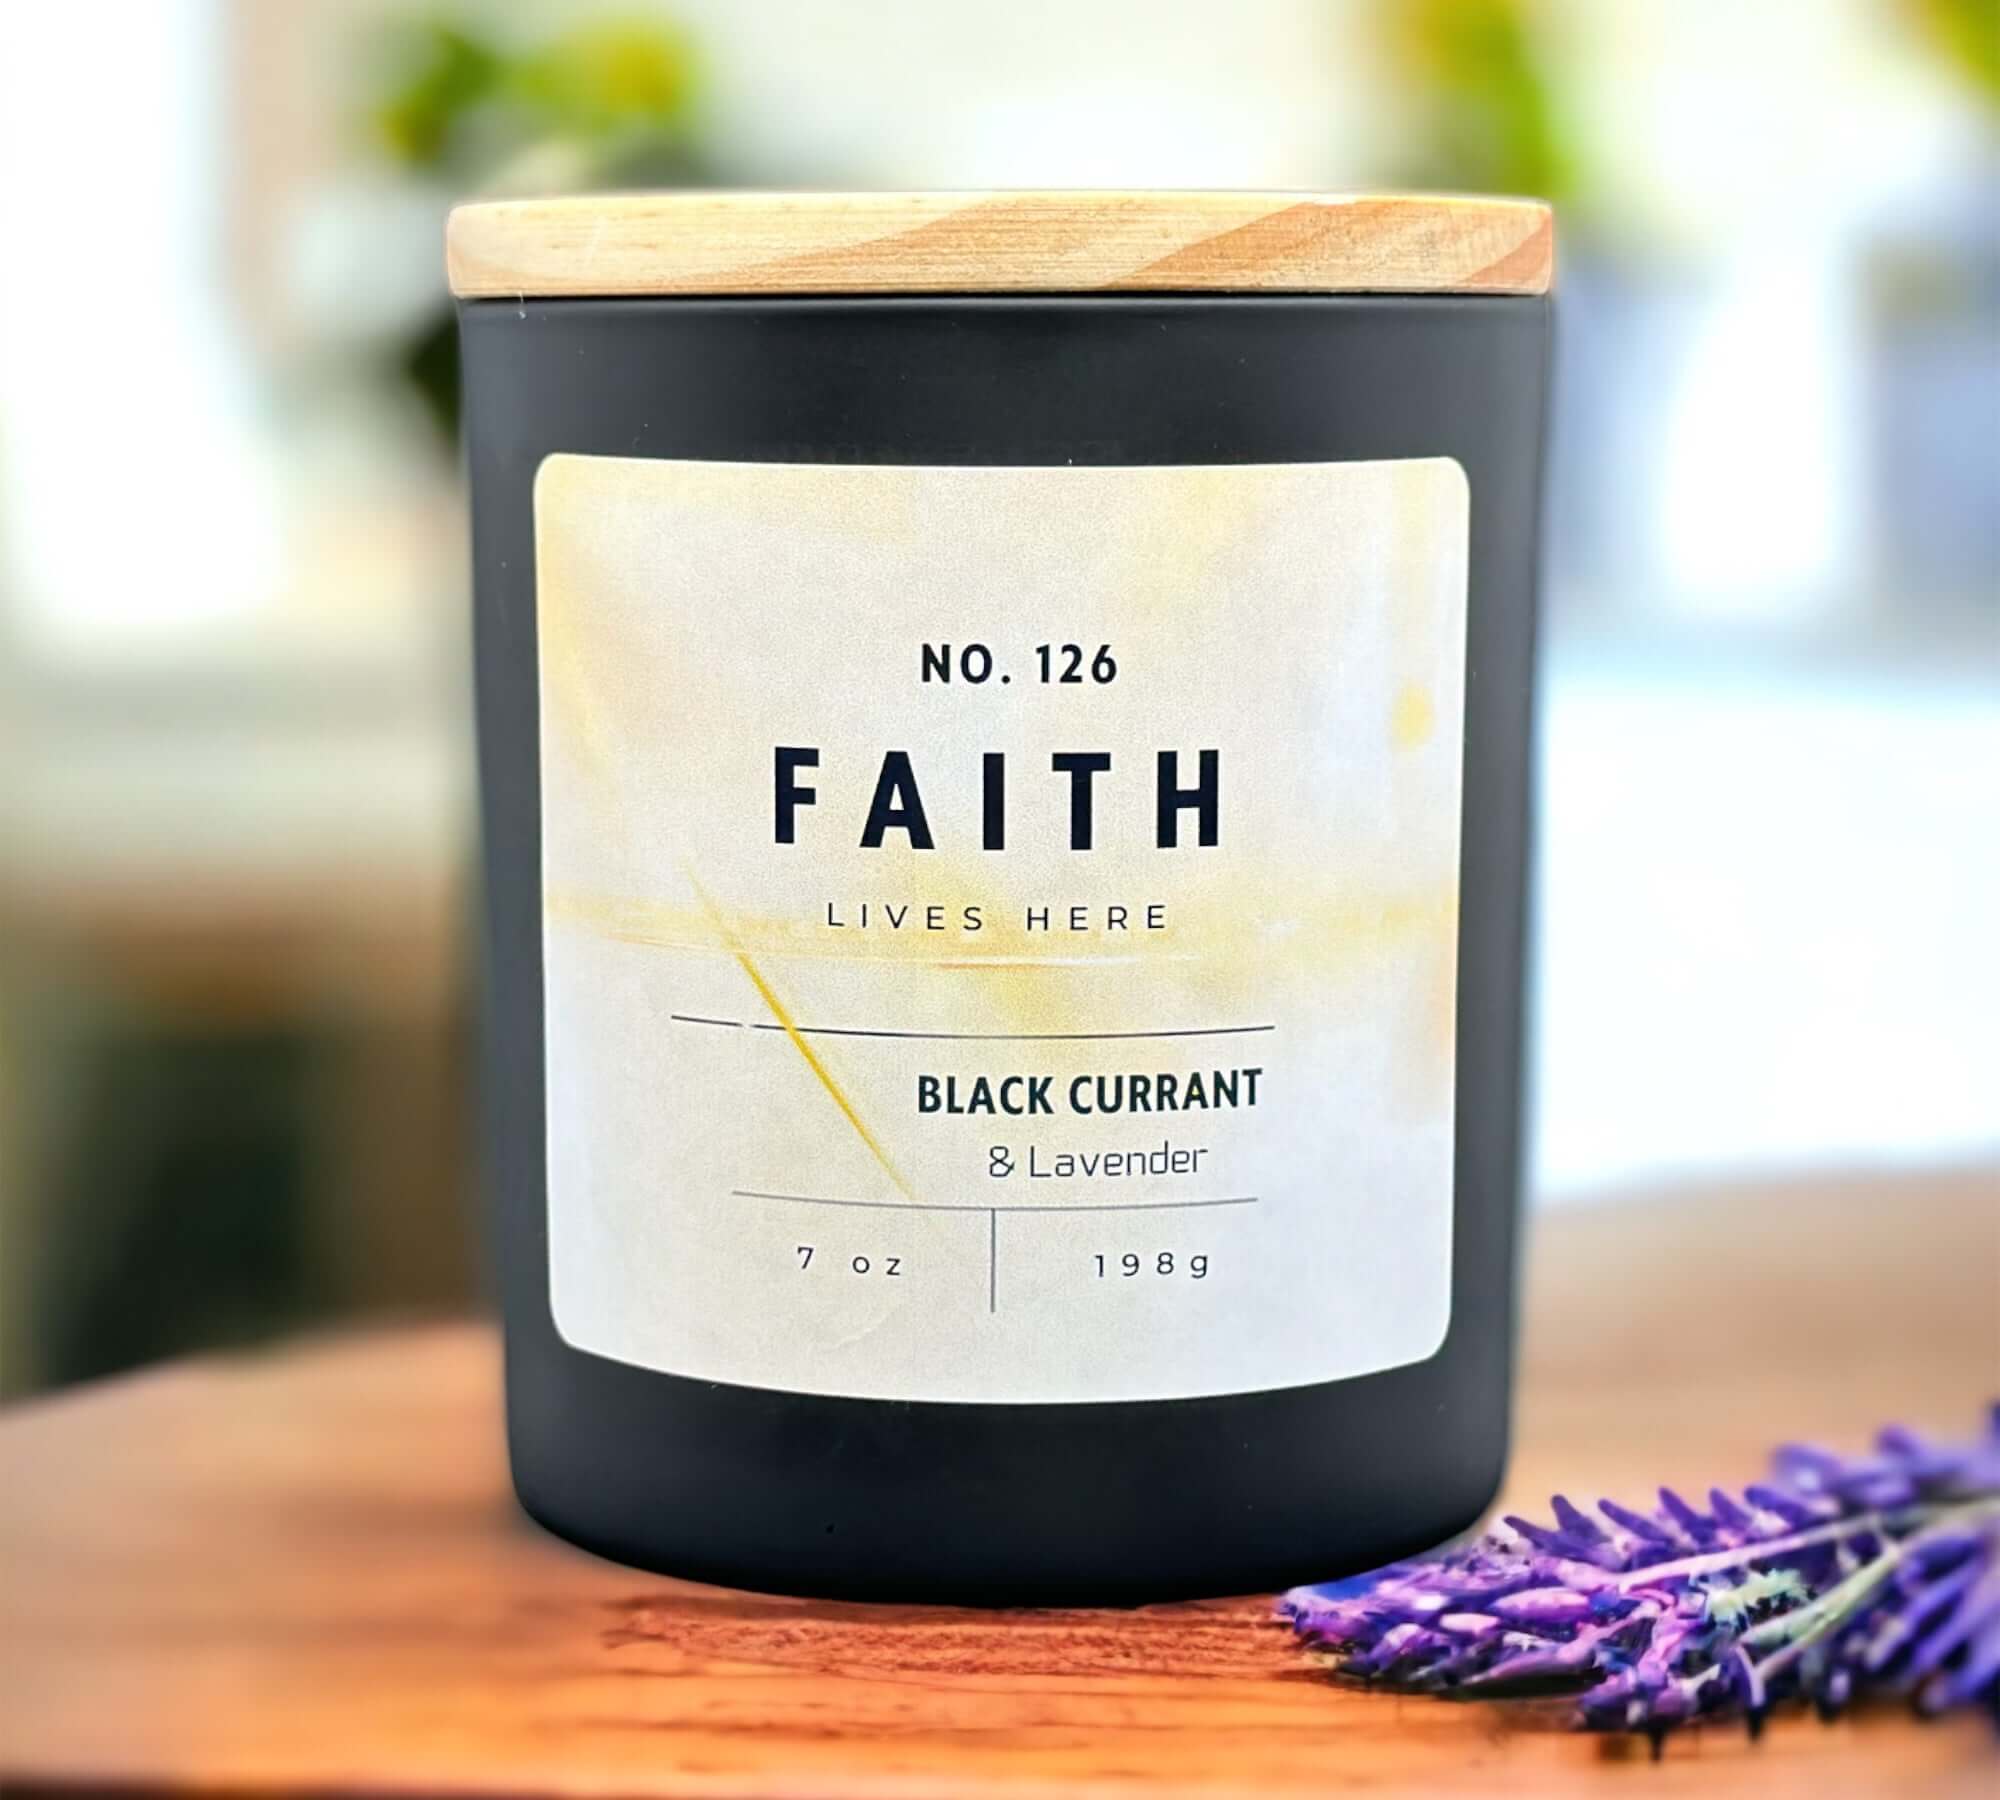 Faith lives here. Black currant and lavender candle